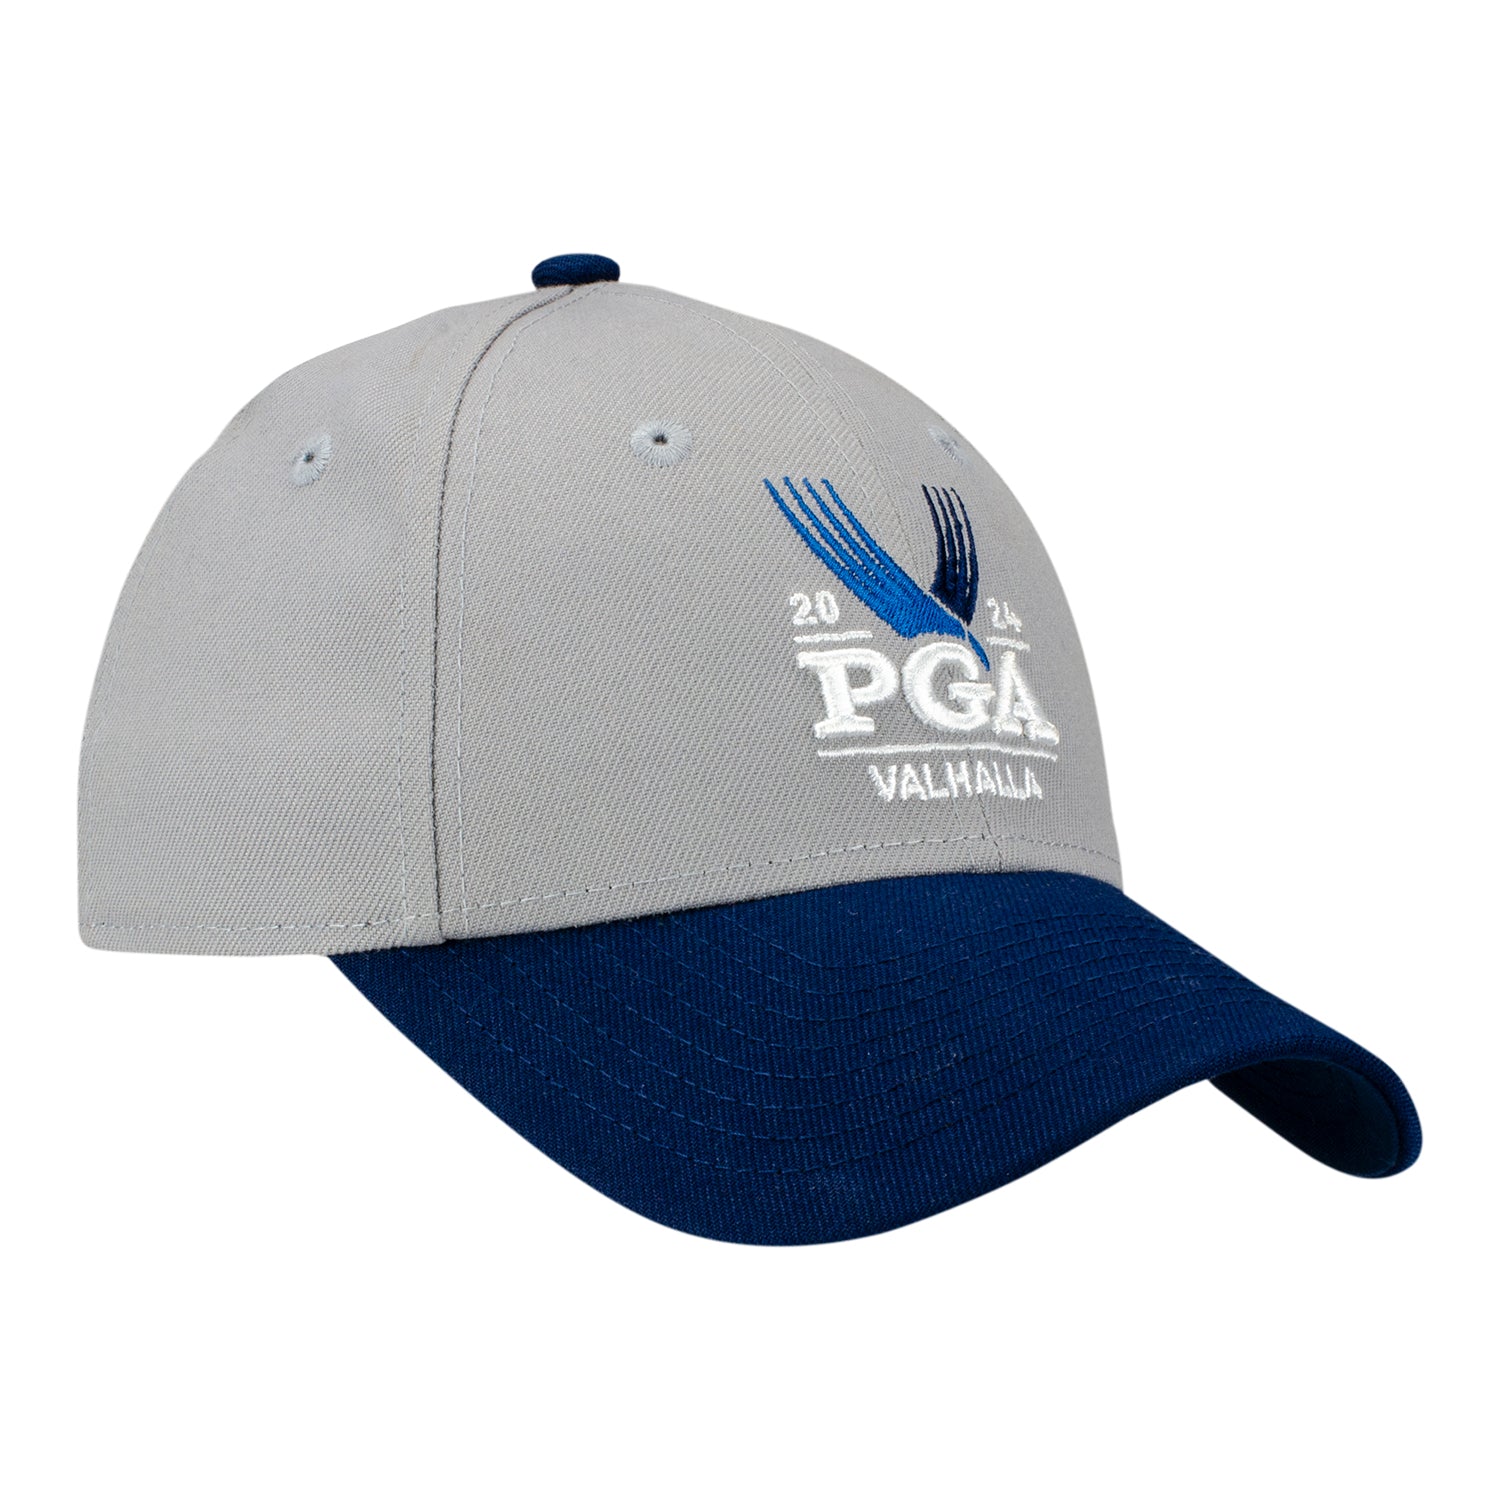 New Era 2024 PGA Championship Youth Two Tone Hat in Grey and Navy - Angled Front Left View